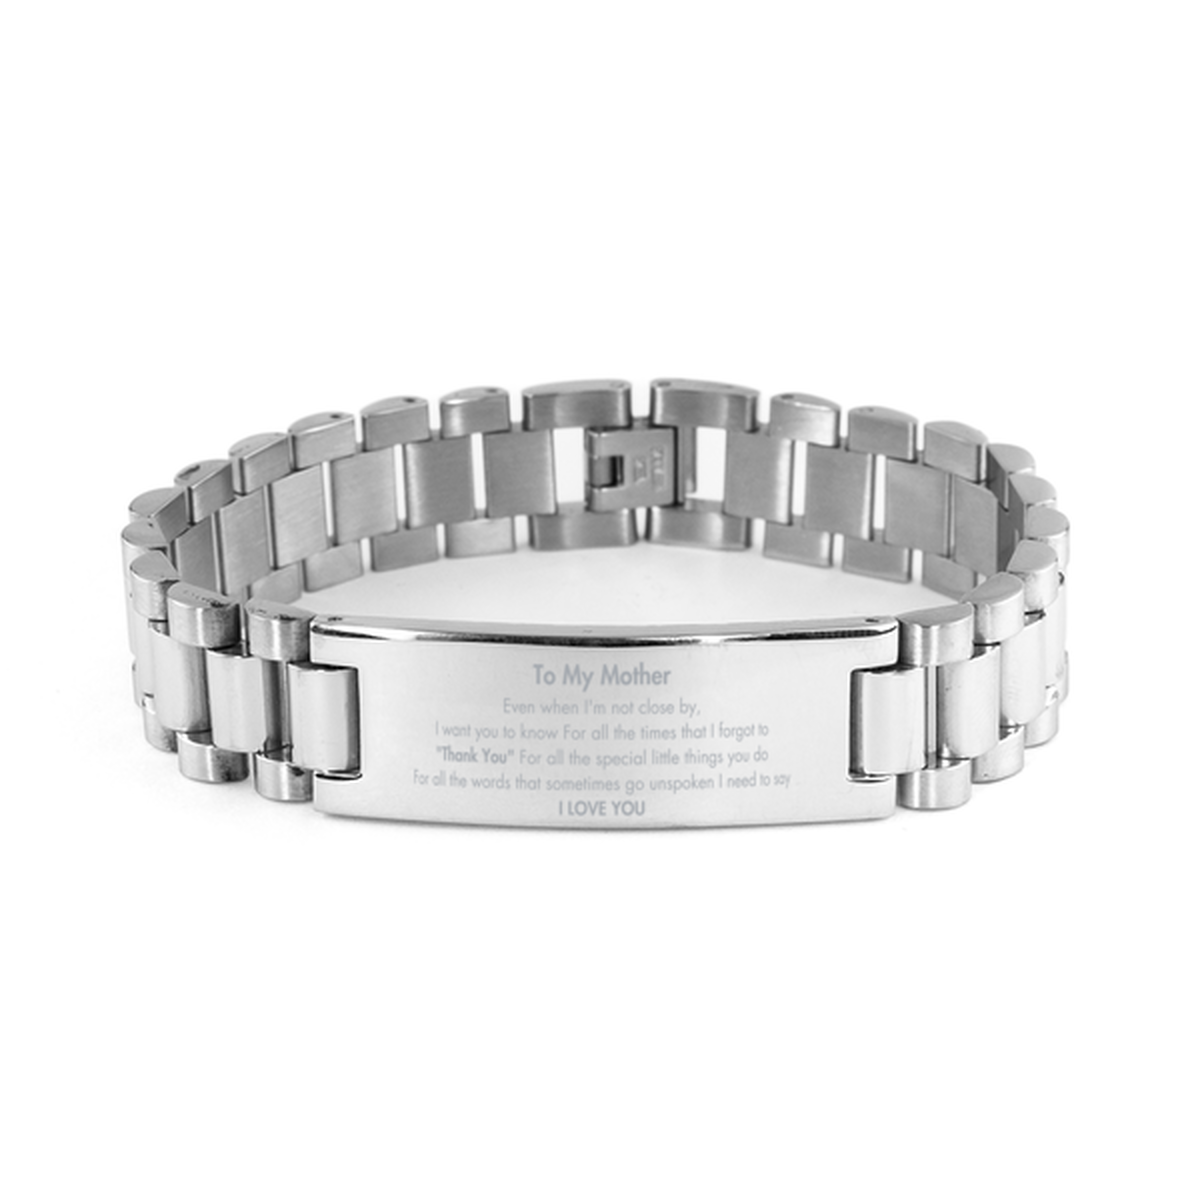 Thank You Gifts for Mother, Keepsake Ladder Stainless Steel Bracelet Gifts for Mother Birthday Mother's day Father's Day Mother For all the words That sometimes go unspoken I need to say I LOVE YOU